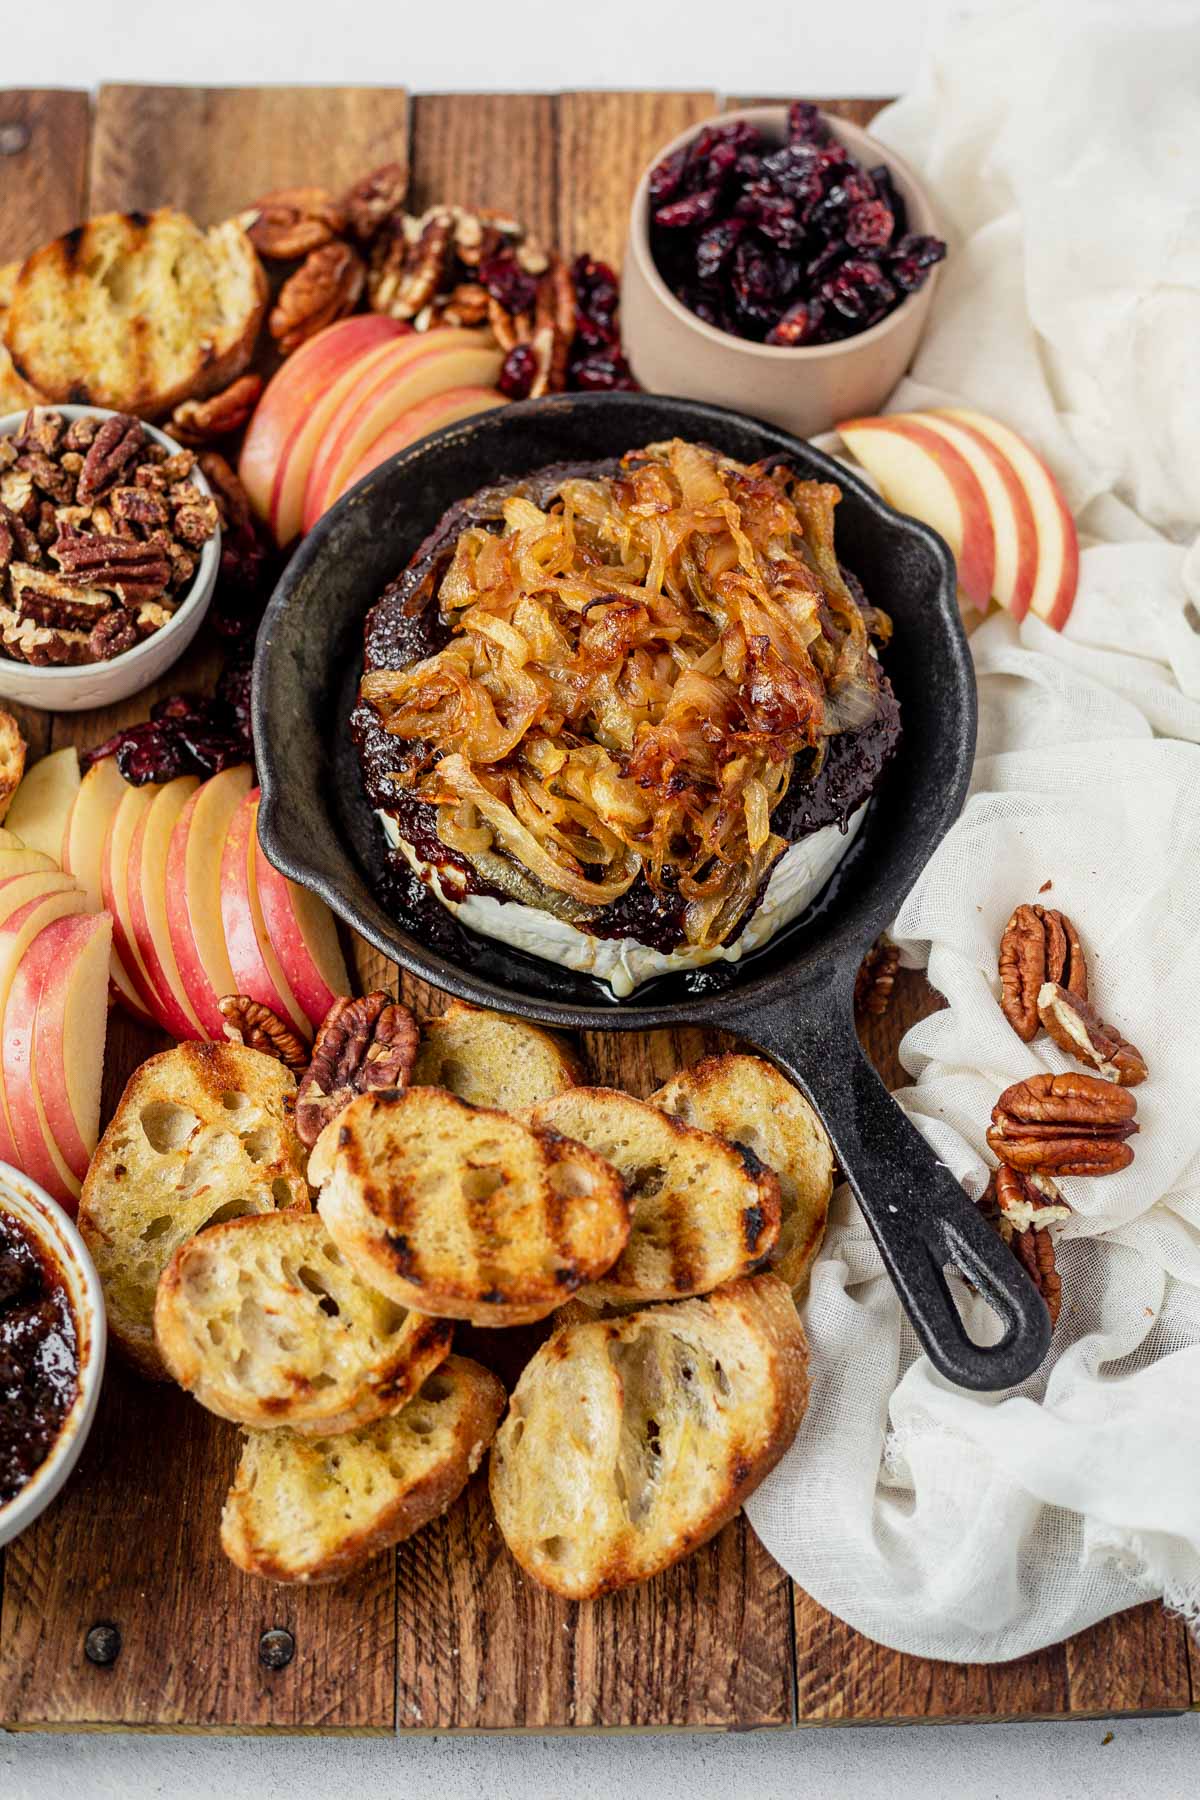 baked brie with fig jam and caramelized onion on a cheese board with apples, nuts and a sliced baguette